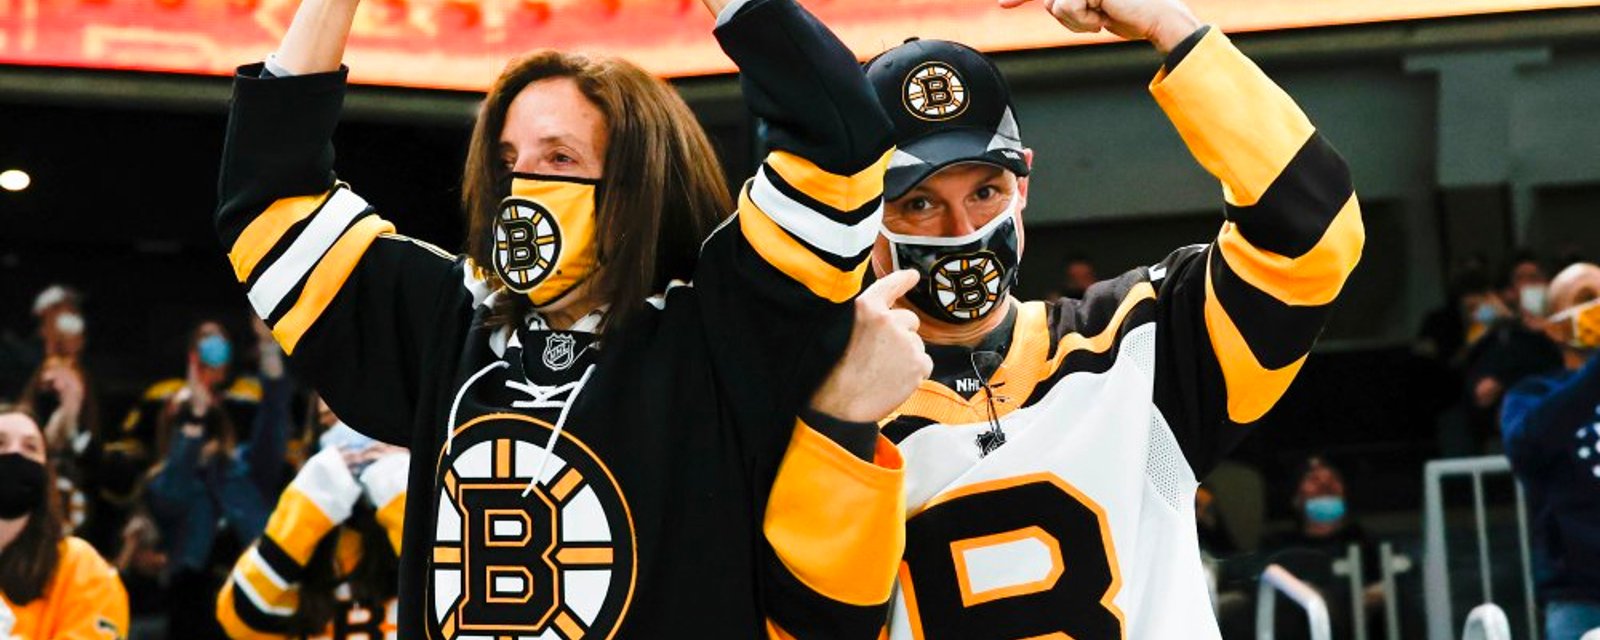 Boston's TD Garden to open at 85% capacity for round two of the playoffs